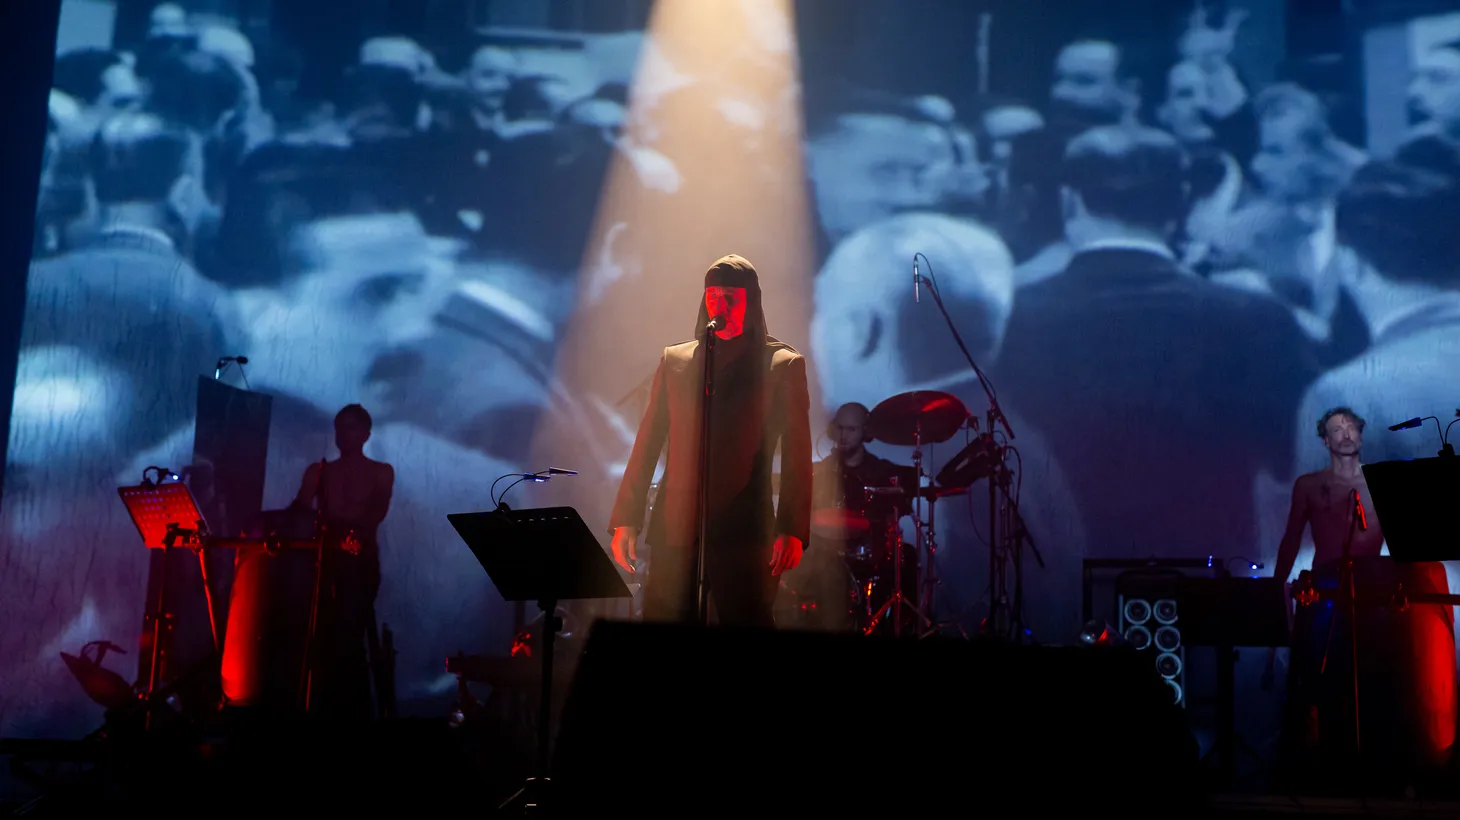 Slovenian avant-gardists Laibach reboot the writings of one of the most significant German playwrights, Heiner Müller, into a theatrical production of his work. Epic in scope, “Ich wil ein Deutscher sein” translates to “I Want to Be a German.”